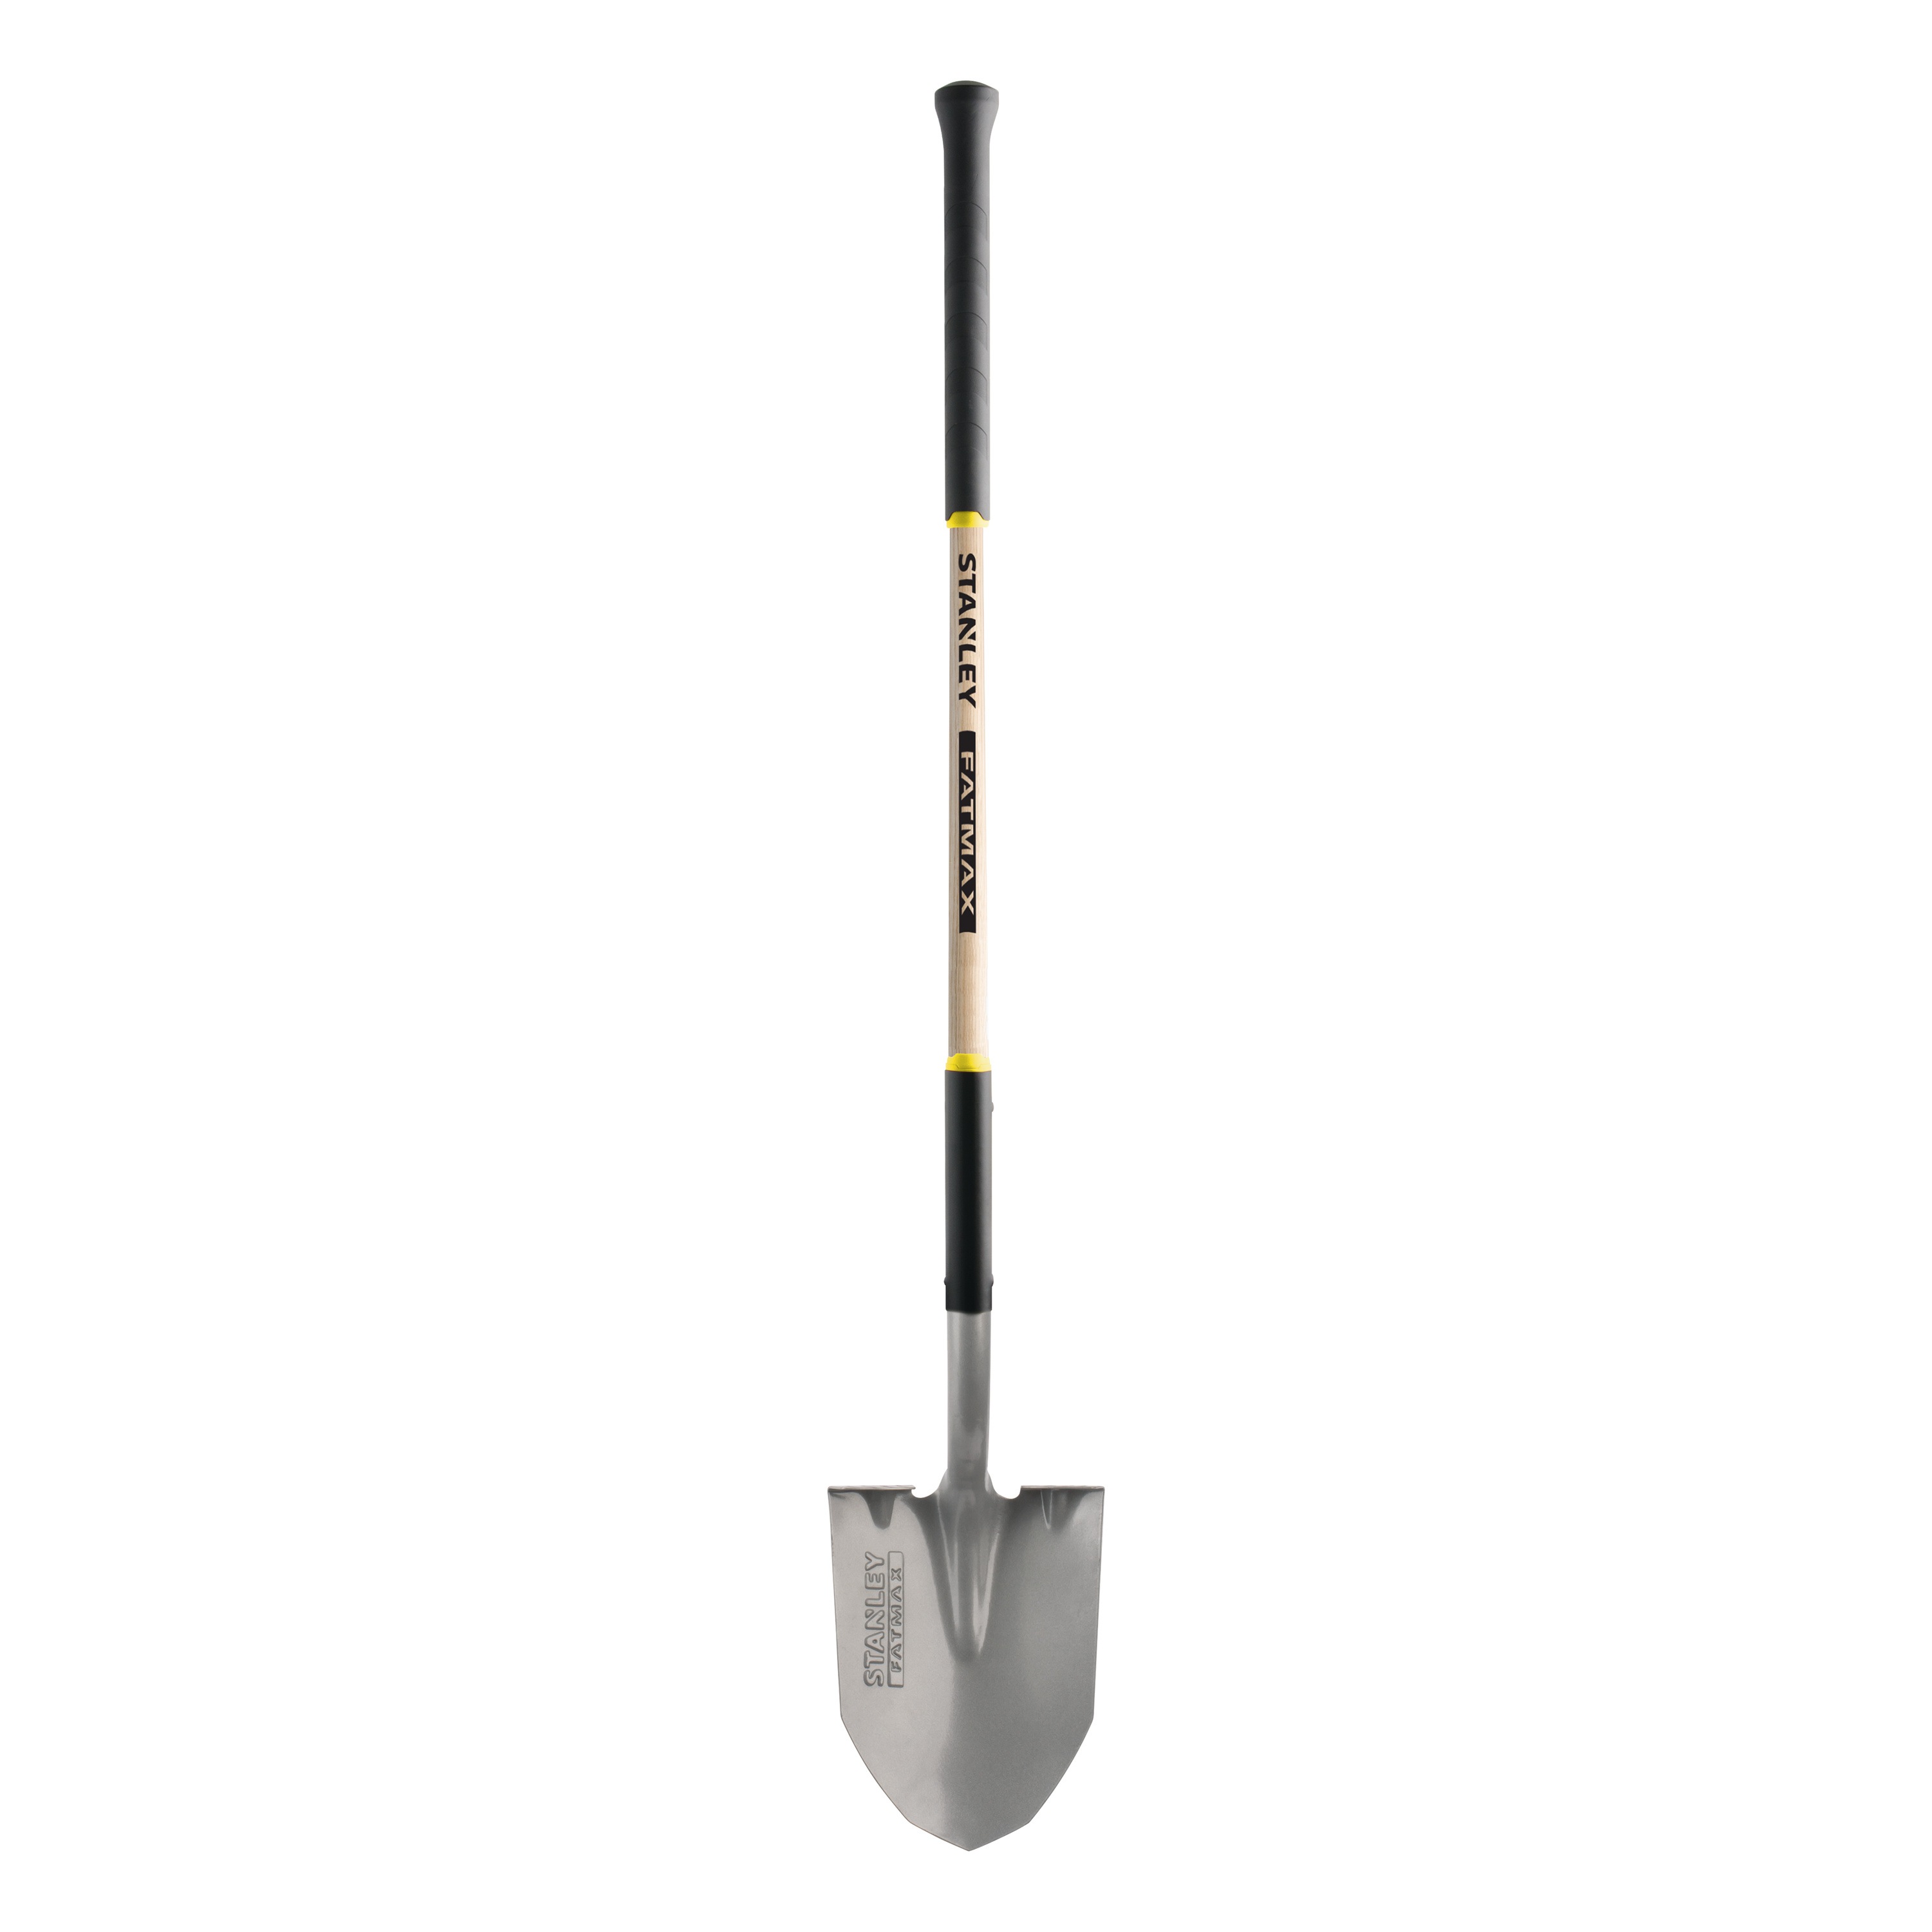 Stanley Tools - FATMAX ASHWOOD HANDLE ROUND POINT SHOVEL - BDS8062